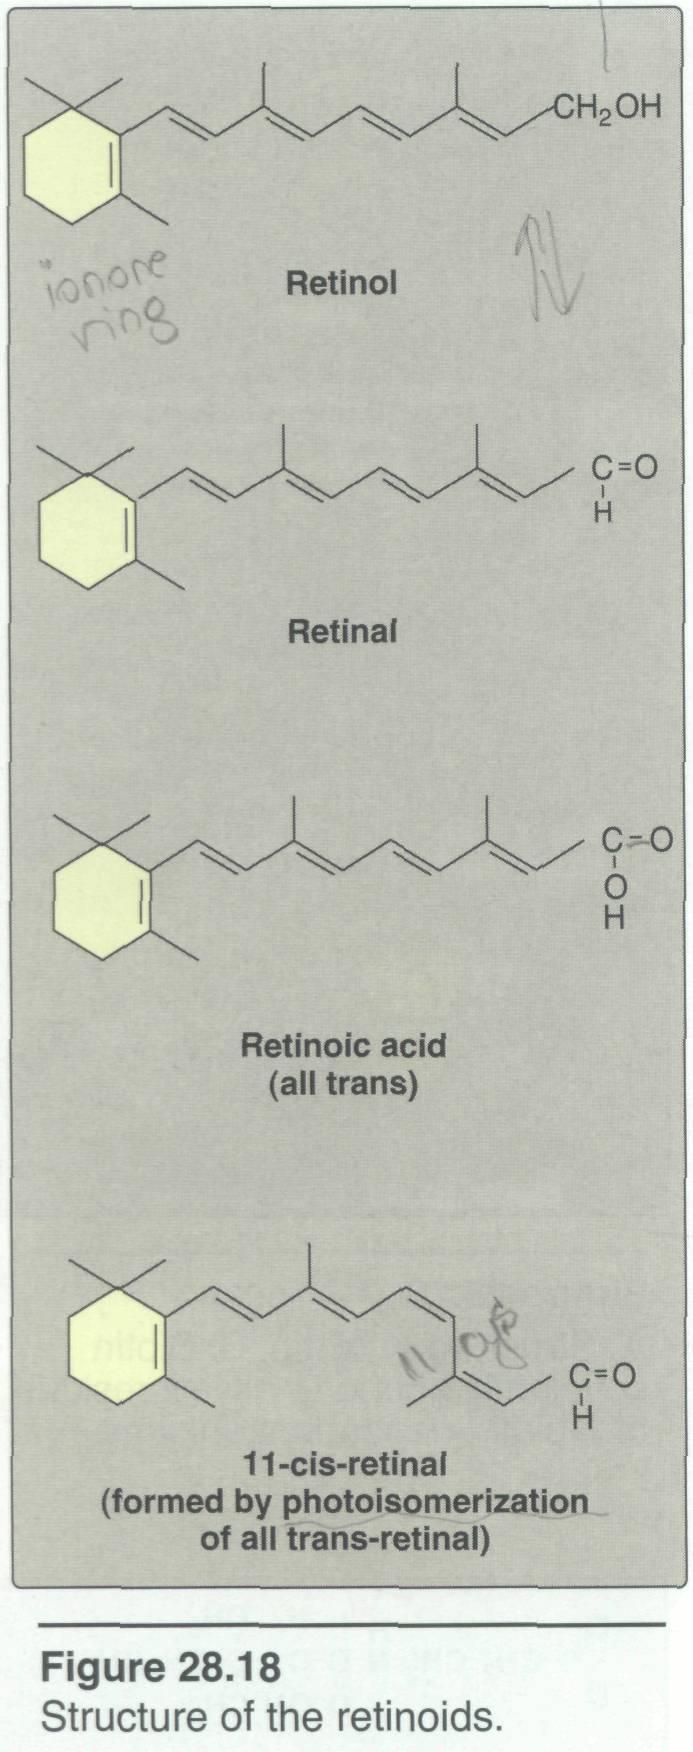 oxidation Aldehyde group trans Don't forget : retinoic acid can't be reduced in the body to retinal or retinol This means that the reaction from retinal to retinoic